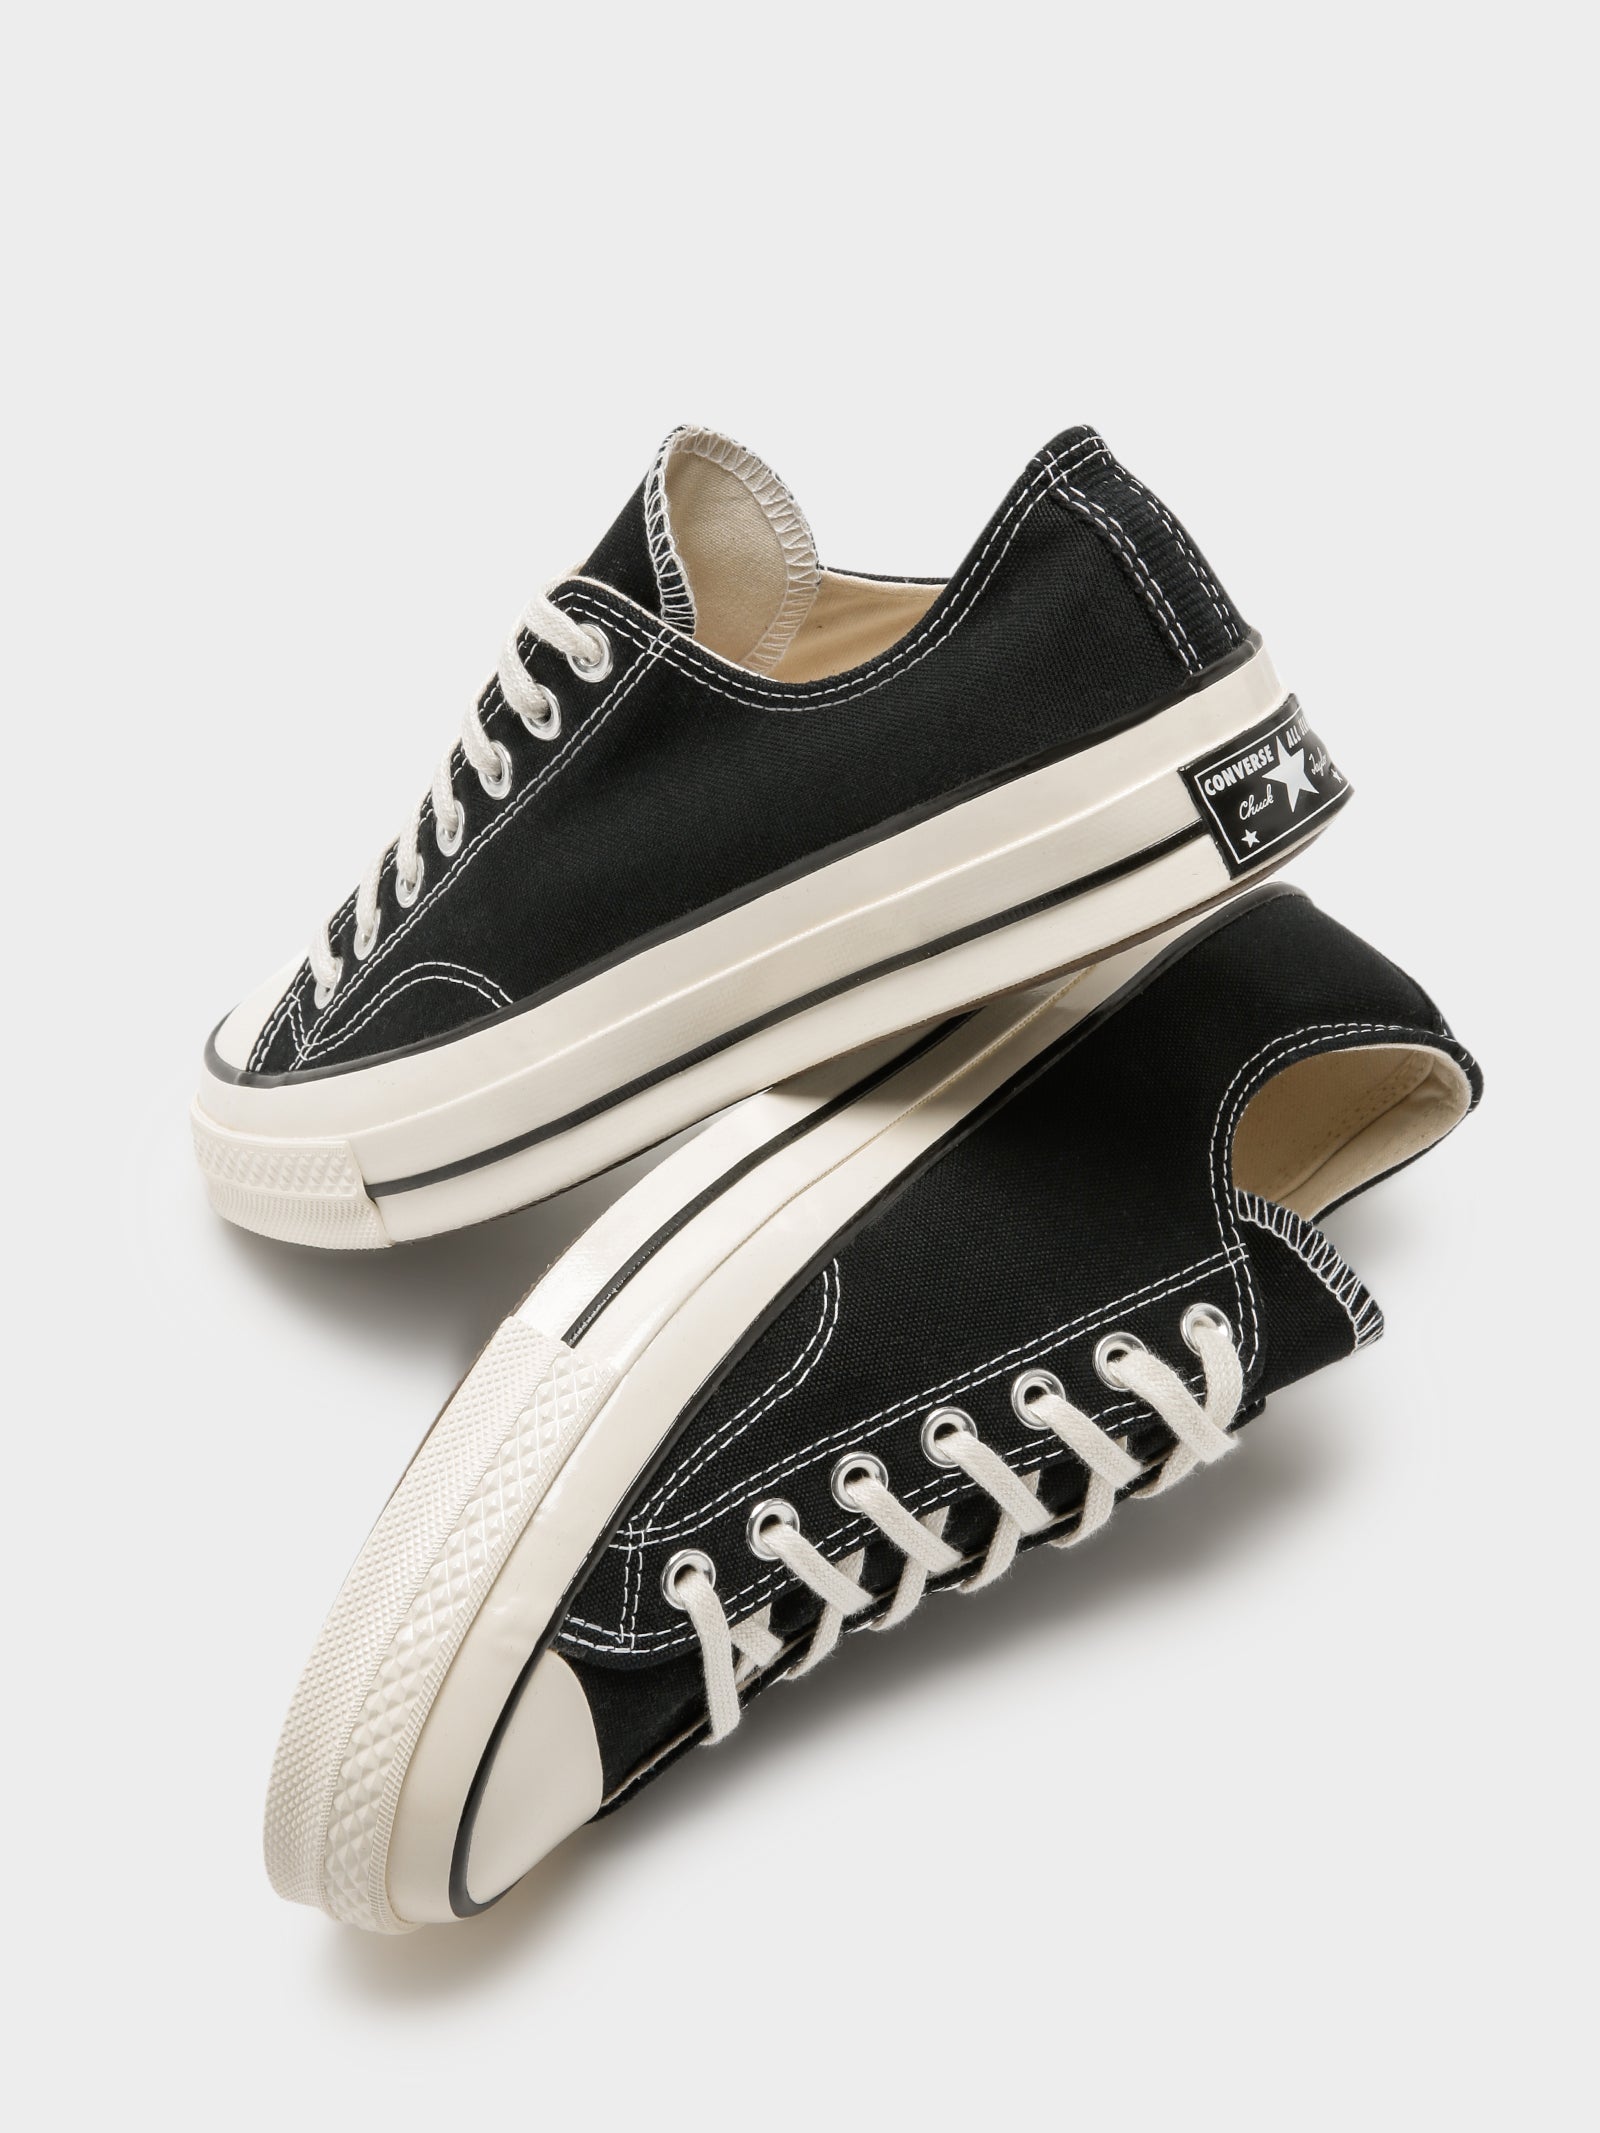 Unisex Chuck Taylor All Star 70 Low Top Sneakers in Black Glue Store